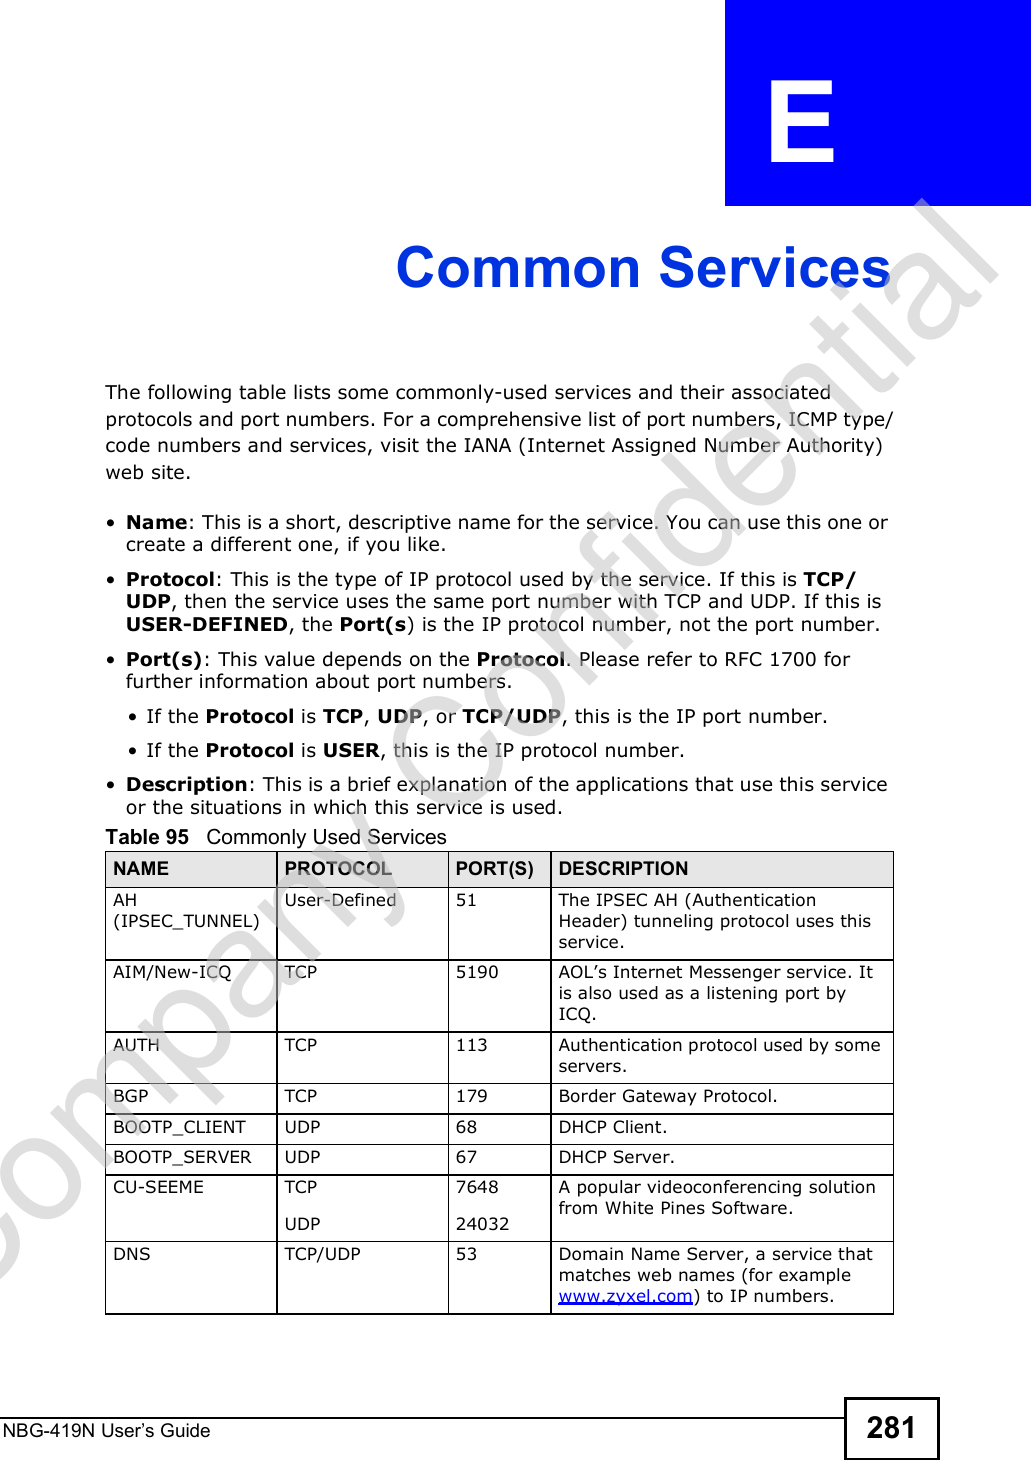 NBG-419N User s Guide 281APPENDIX  E Common ServicesThe following table lists some commonly-used services and their associated protocols and port numbers. For a comprehensive list of port numbers, ICMP type/code numbers and services, visit the IANA (Internet Assigned Number Authority) web site.  Name: This is a short, descriptive name for the service. You can use this one or create a different one, if you like. Protocol: This is the type of IP protocol used by the service. If this is TCP/UDP, then the service uses the same port number with TCP and UDP. If this is USER-DEFINED, the Port(s) is the IP protocol number, not the port number. Port(s): This value depends on the Protocol. Please refer to RFC 1700 for further information about port numbers. If the Protocol is TCP, UDP, or TCP/UDP, this is the IP port number. If the Protocol is USER, this is the IP protocol number. Description: This is a brief explanation of the applications that use this service or the situations in which this service is used.Table 95   Commonly Used ServicesNAME PROTOCOL PORT(S) DESCRIPTIONAH (IPSEC_TUNNEL)User-Defined 51 The IPSEC AH (Authentication Header) tunneling protocol uses this service.AIM/New-ICQ TCP 5190 AOL!s Internet Messenger service. It is also used as a listening port by ICQ.AUTH TCP 113 Authentication protocol used by some servers.BGP TCP 179 Border Gateway Protocol.BOOTP_CLIENT UDP 68 DHCP Client.BOOTP_SERVER UDP 67 DHCP Server.CU-SEEME TCPUDP764824032A popular videoconferencing solution from White Pines Software.DNS TCP/UDP 53 Domain Name Server, a service that matches web names (for example www.zyxel.com) to IP numbers.Company Confidential